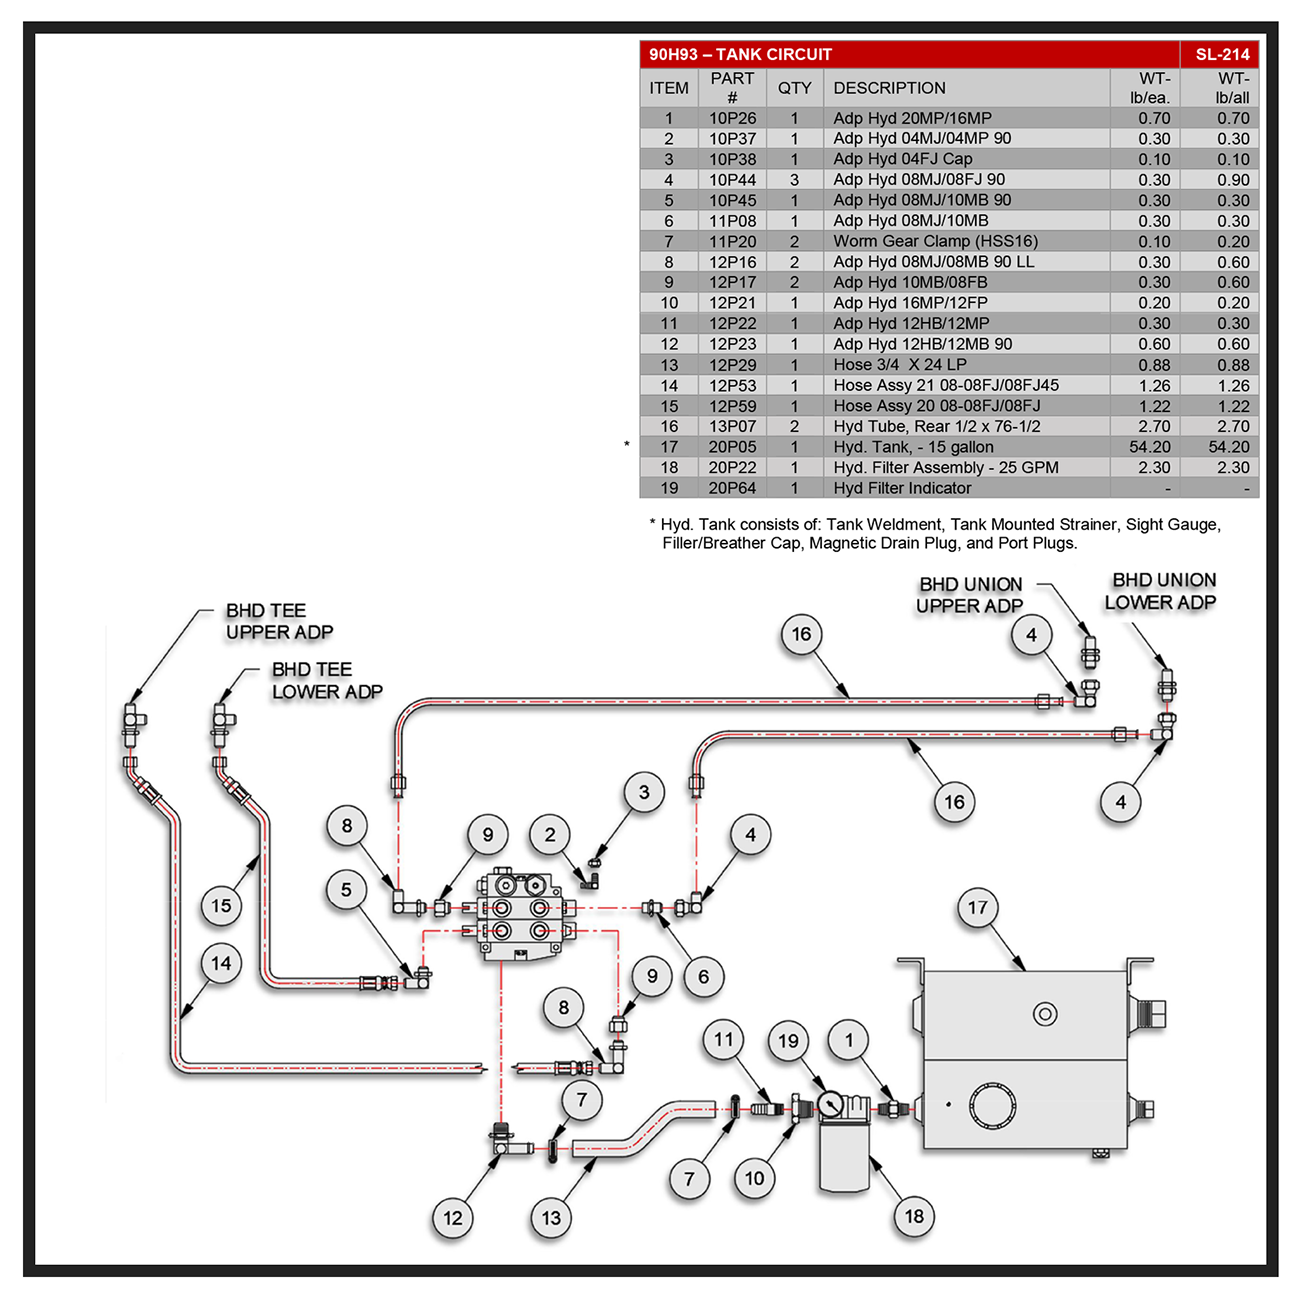 Swaploader SL-180/214 Hydraulic Sub-Assembly Chassis Tank Circuit Diagram